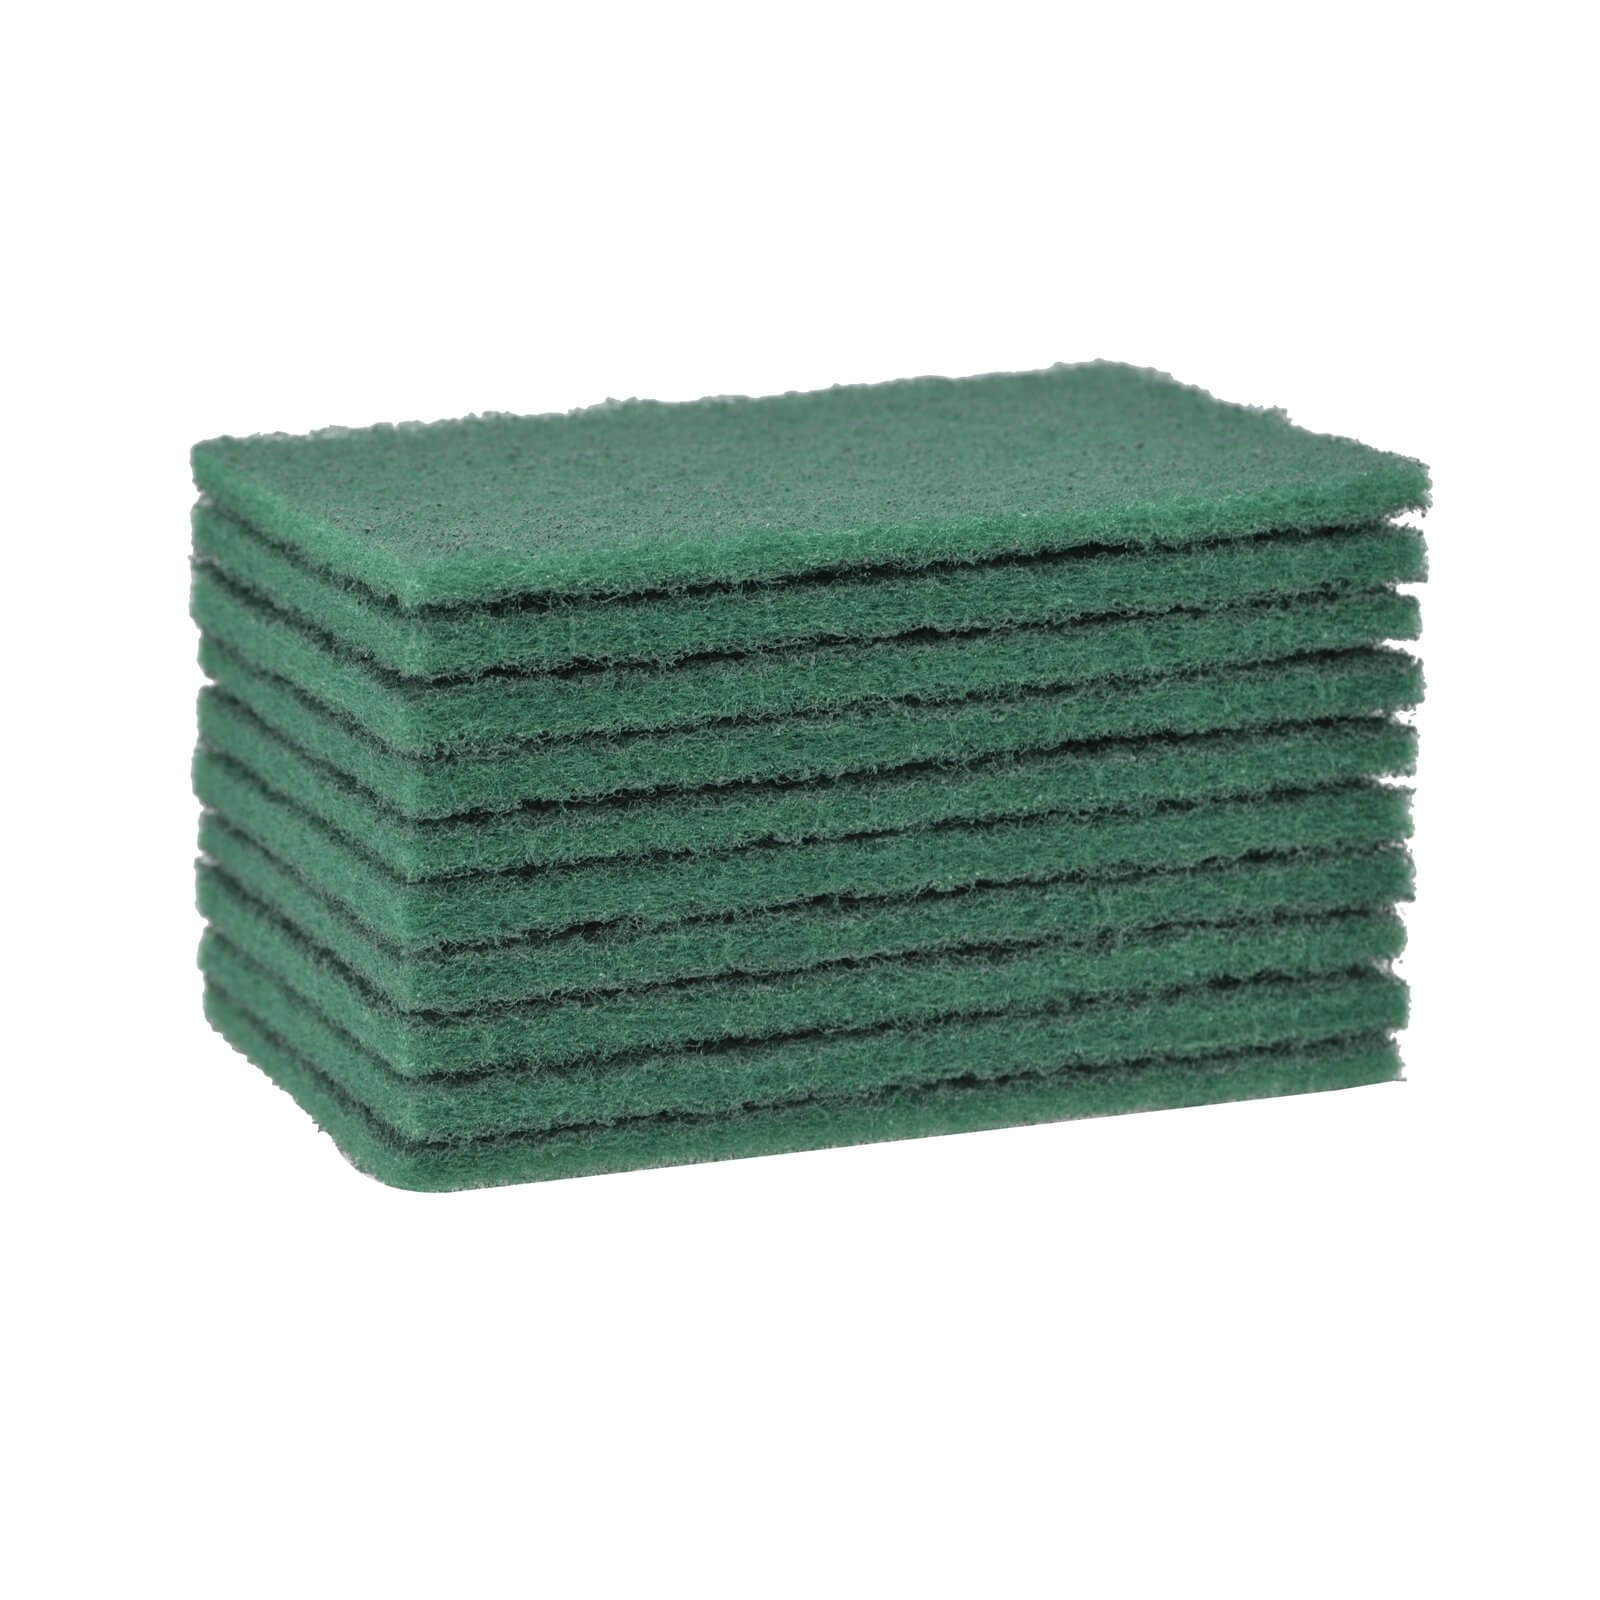 10 pack of Heavy-duty Scouring Pads